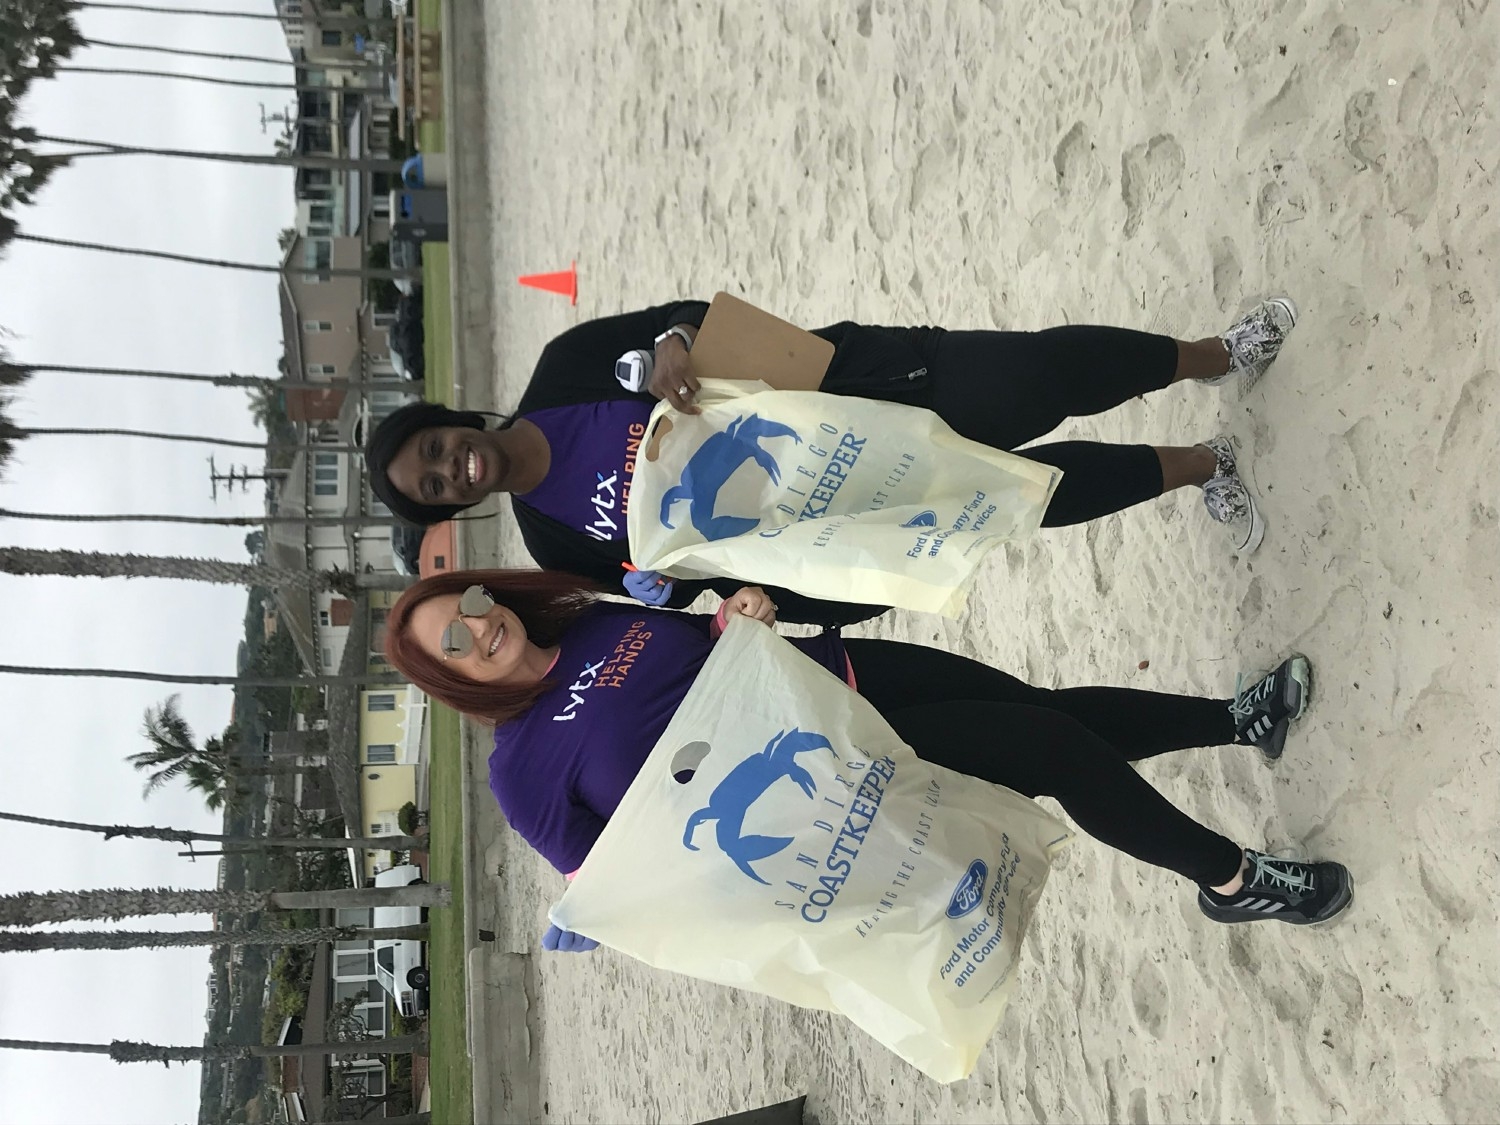 San Diego beach clean-up. Employees utilizing their VTO hours to get out in the community and make a difference. 